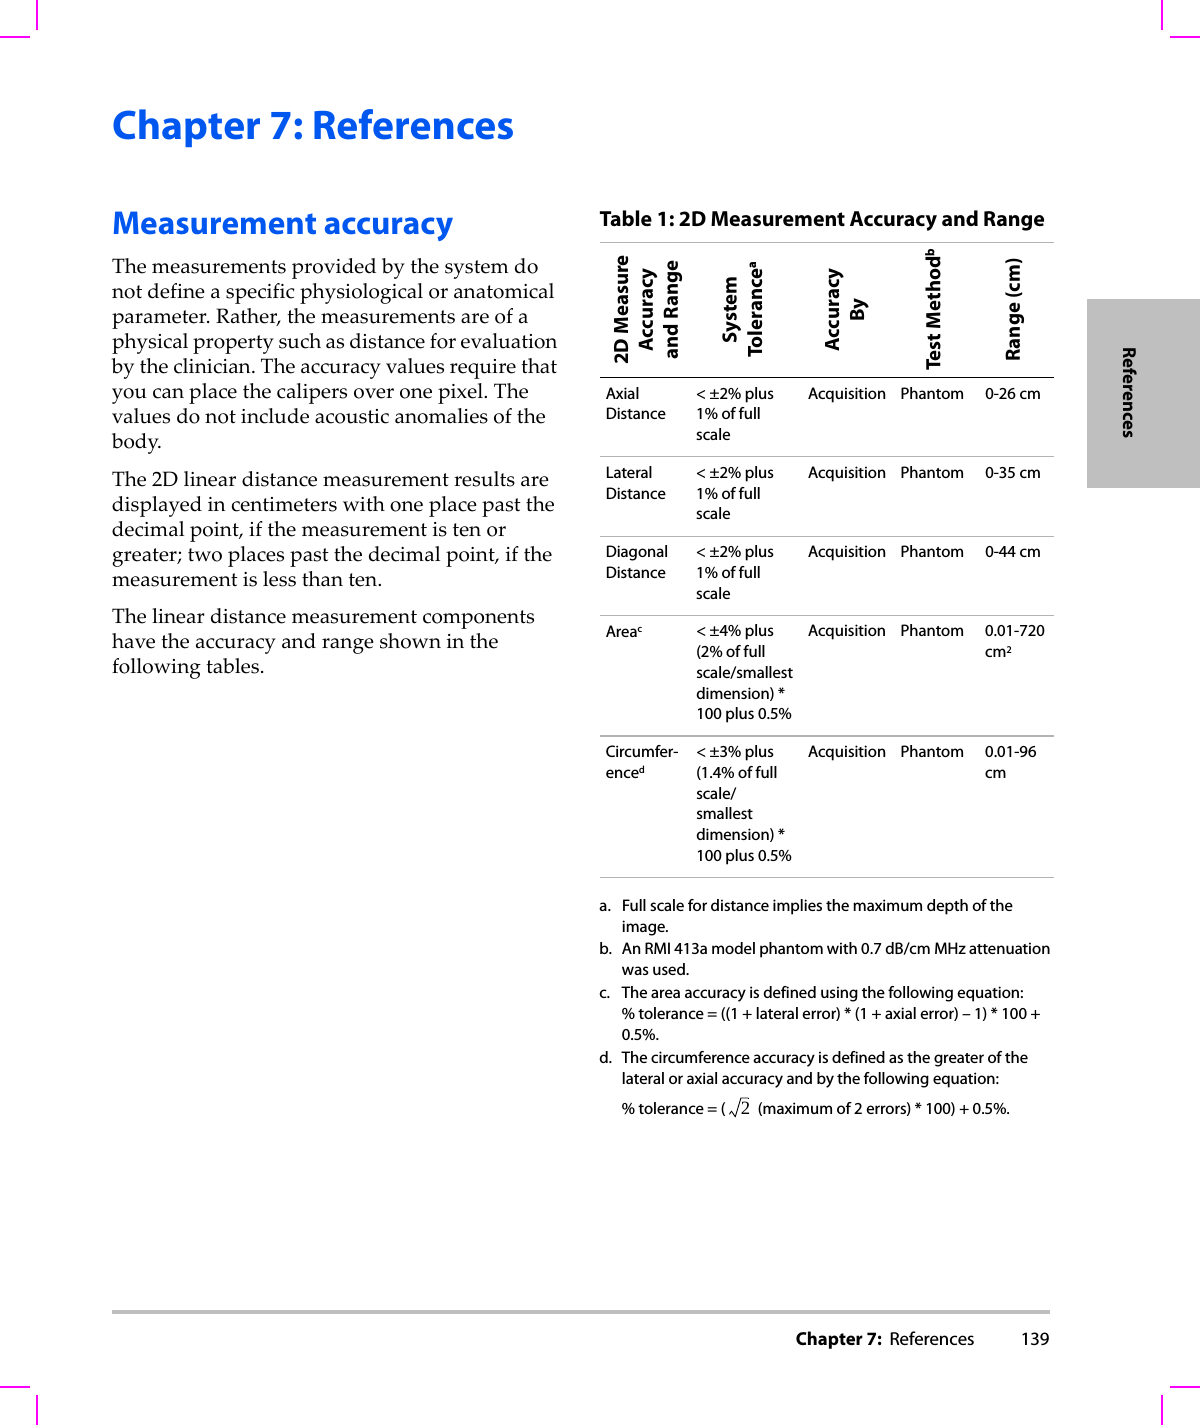 Chapter 7:  References 139ReferencesChapter 7: ReferencesMeasurement accuracyThemeasurementsprovidedbythesystemdonotdefineaspecificphysiologicaloranatomicalparameter.Rather,themeasurementsareofaphysicalpropertysuchasdistanceforevaluationbytheclinician.Theaccuracyvaluesrequirethatyoucanplacethecalipersoveronepixel.Thevaluesdonotincludeacousticanomaliesofthebody.The2Dlineardistancemeasurementresultsaredisplayedincentimeterswithoneplacepastthedecimalpoint,ifthemeasurementistenorgreater;twoplacespastthedecimalpoint,ifthemeasurementislessthanten.Thelineardistancemeasurementcomponentshavetheaccuracyandrangeshowninthefollowingtables.Table 1: 2D Measurement Accuracy and Range2D MeasureAccuracyand RangeSystemToleranceaAccuracy ByTest MethodbRange (cm)Axial Distance&lt; ±2% plus 1% of full scaleAcquisition Phantom 0-26 cmLateral Distance&lt; ±2% plus 1% of full scaleAcquisition Phantom 0-35 cmDiagonal Distance&lt; ±2% plus 1% of full scaleAcquisition Phantom 0-44 cmAreac&lt; ±4% plus (2% of full scale/smallest dimension) * 100 plus 0.5%Acquisition Phantom 0.01-720 cm2Circumfer-enced&lt; ±3% plus (1.4% of full scale/ smallest dimension) * 100 plus 0.5%Acquisition Phantom 0.01-96 cma. Full scale for distance implies the maximum depth of the image.b. An RMI 413a model phantom with 0.7 dB/cm MHz attenuation was used.c. The area accuracy is defined using the following equation:% tolerance = ((1 + lateral error) * (1 + axial error) – 1) * 100 + 0.5%.d. The circumference accuracy is defined as the greater of the lateral or axial accuracy and by the following equation: % tolerance = (  (maximum of 2 errors) * 100) + 0.5%.2